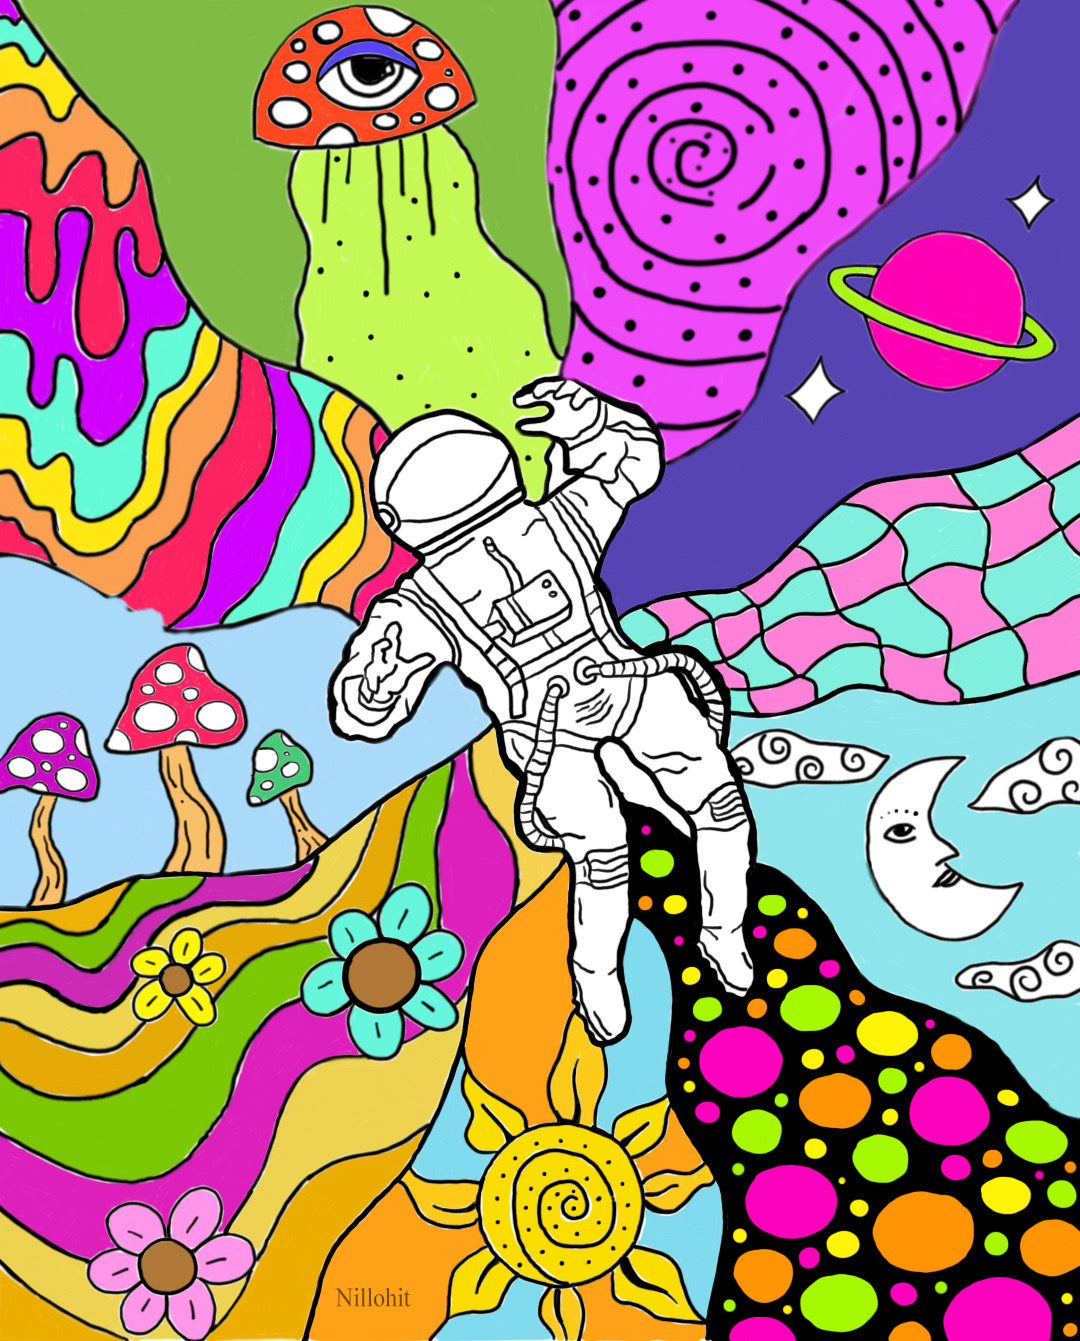 Psychedelic Trippy Art on Behance